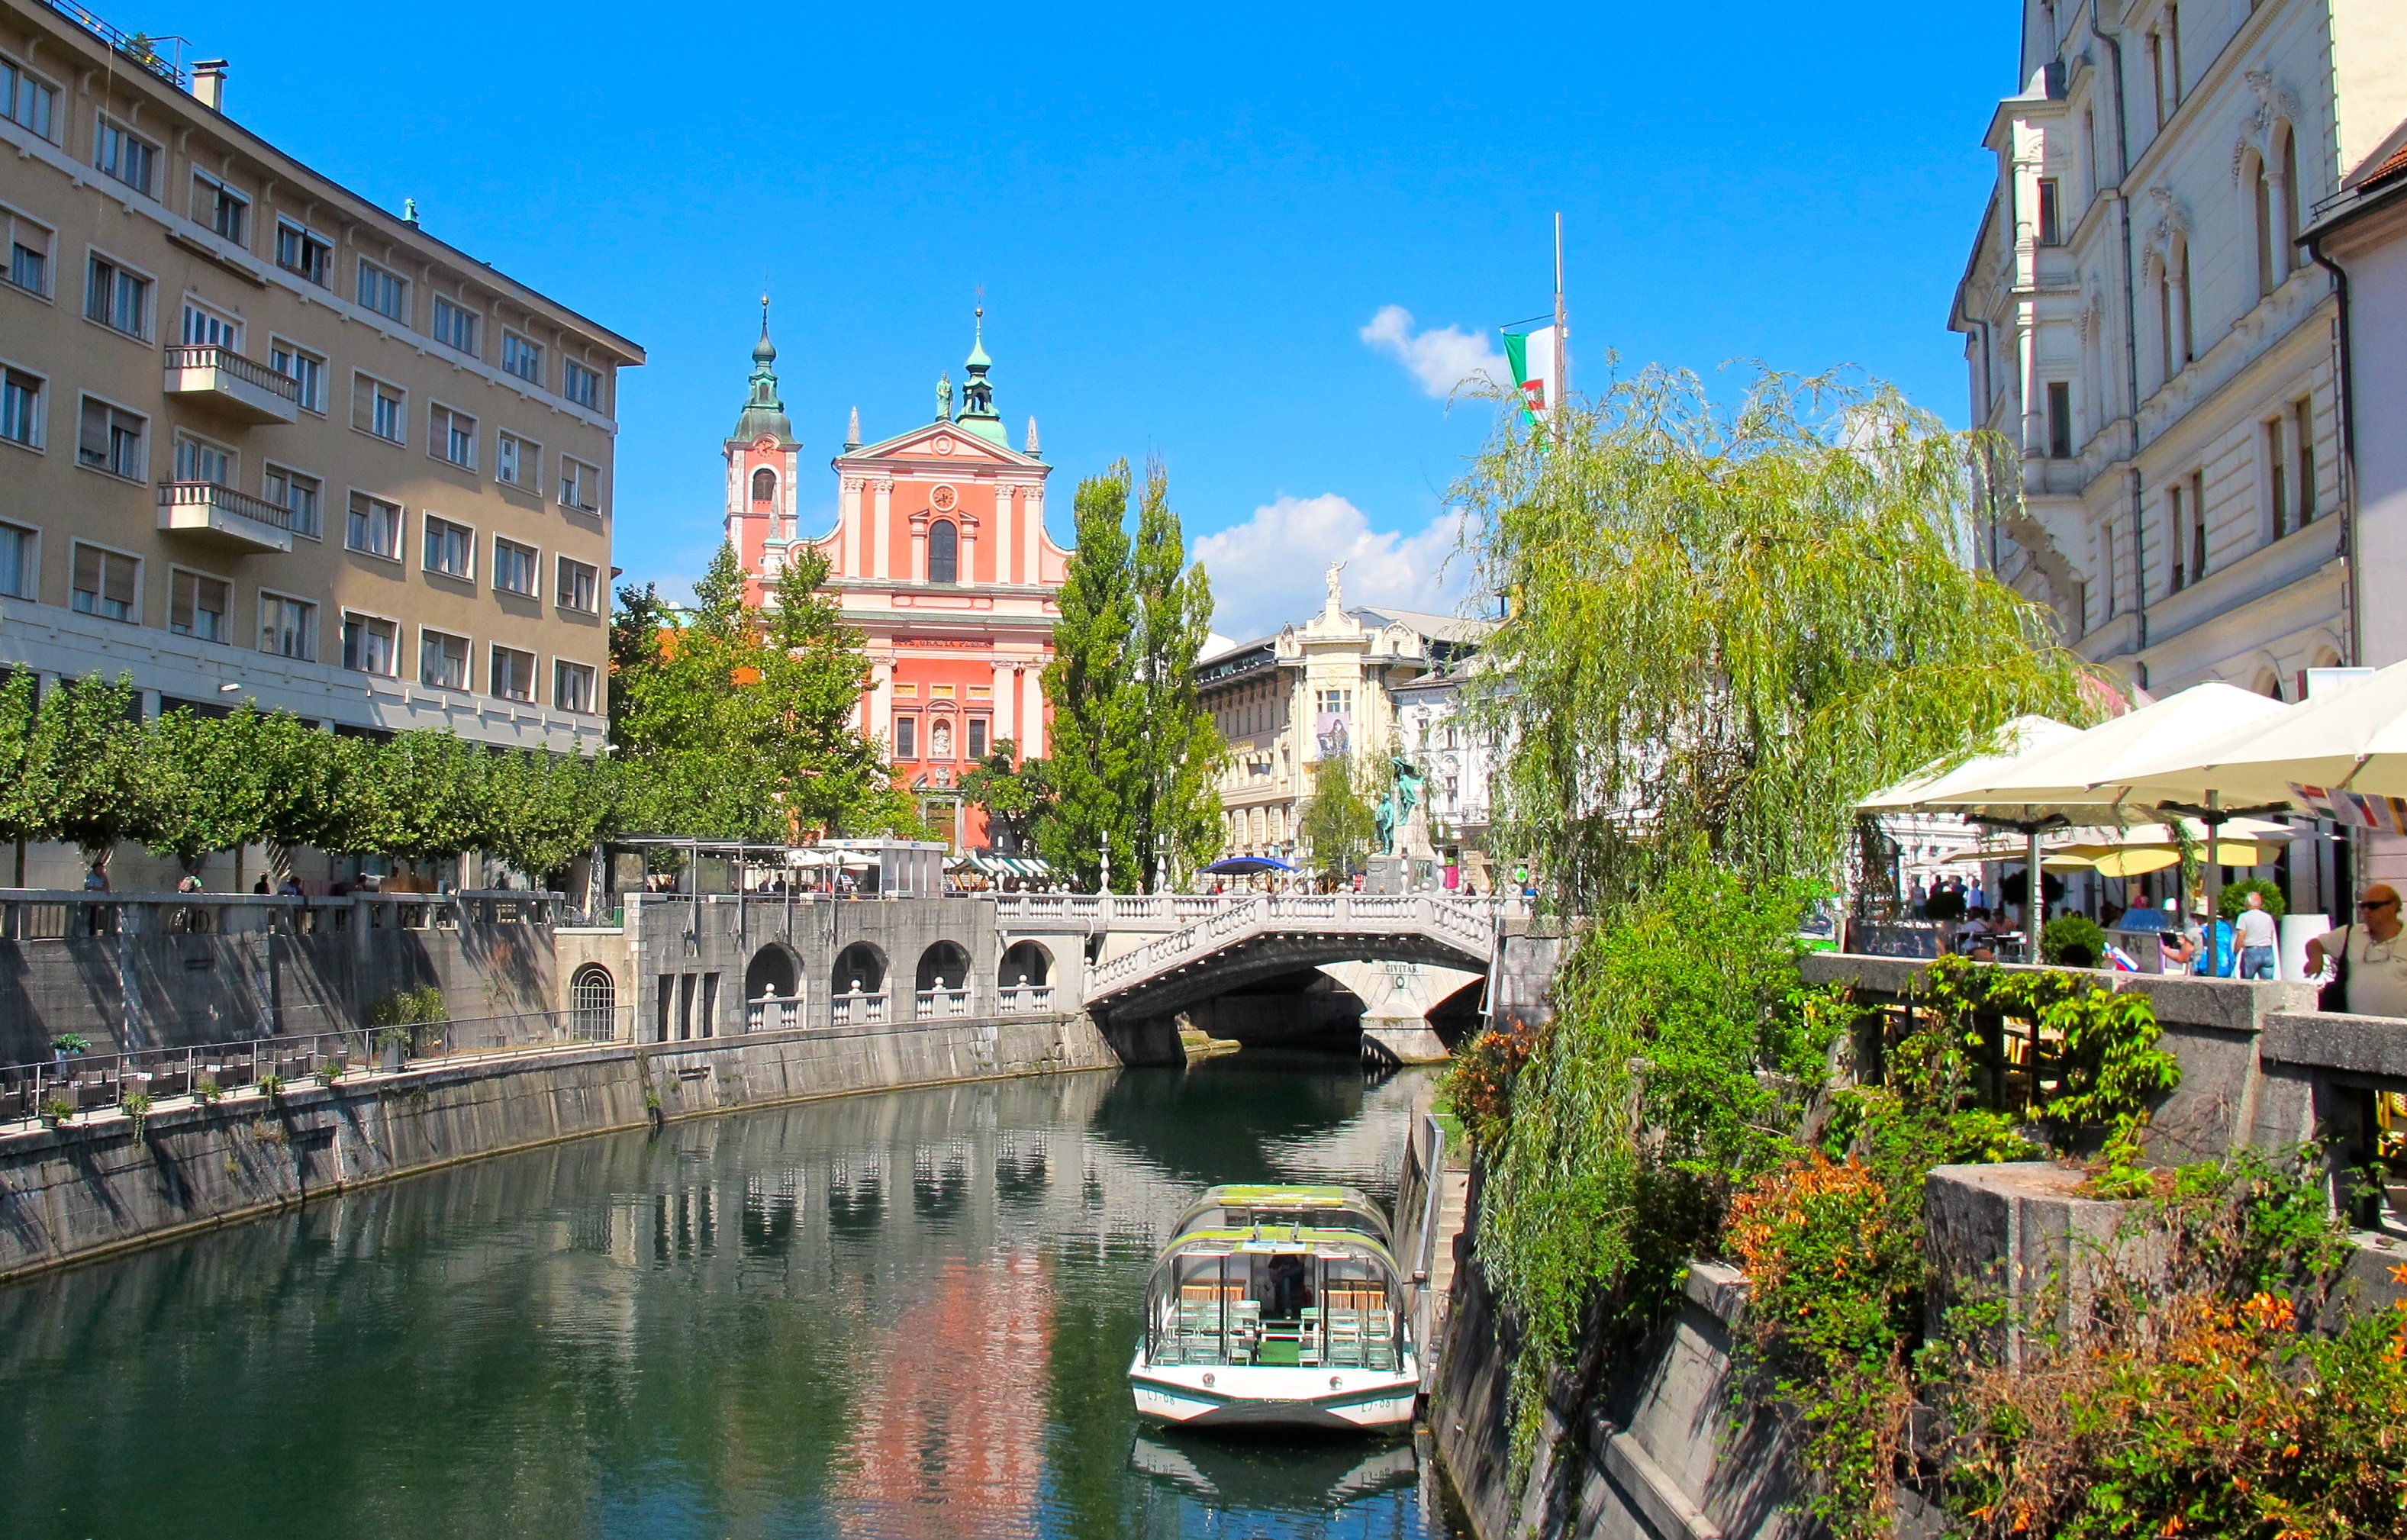 The Ljublijanica River curves and twists past lively cafes and tree-lined parks.